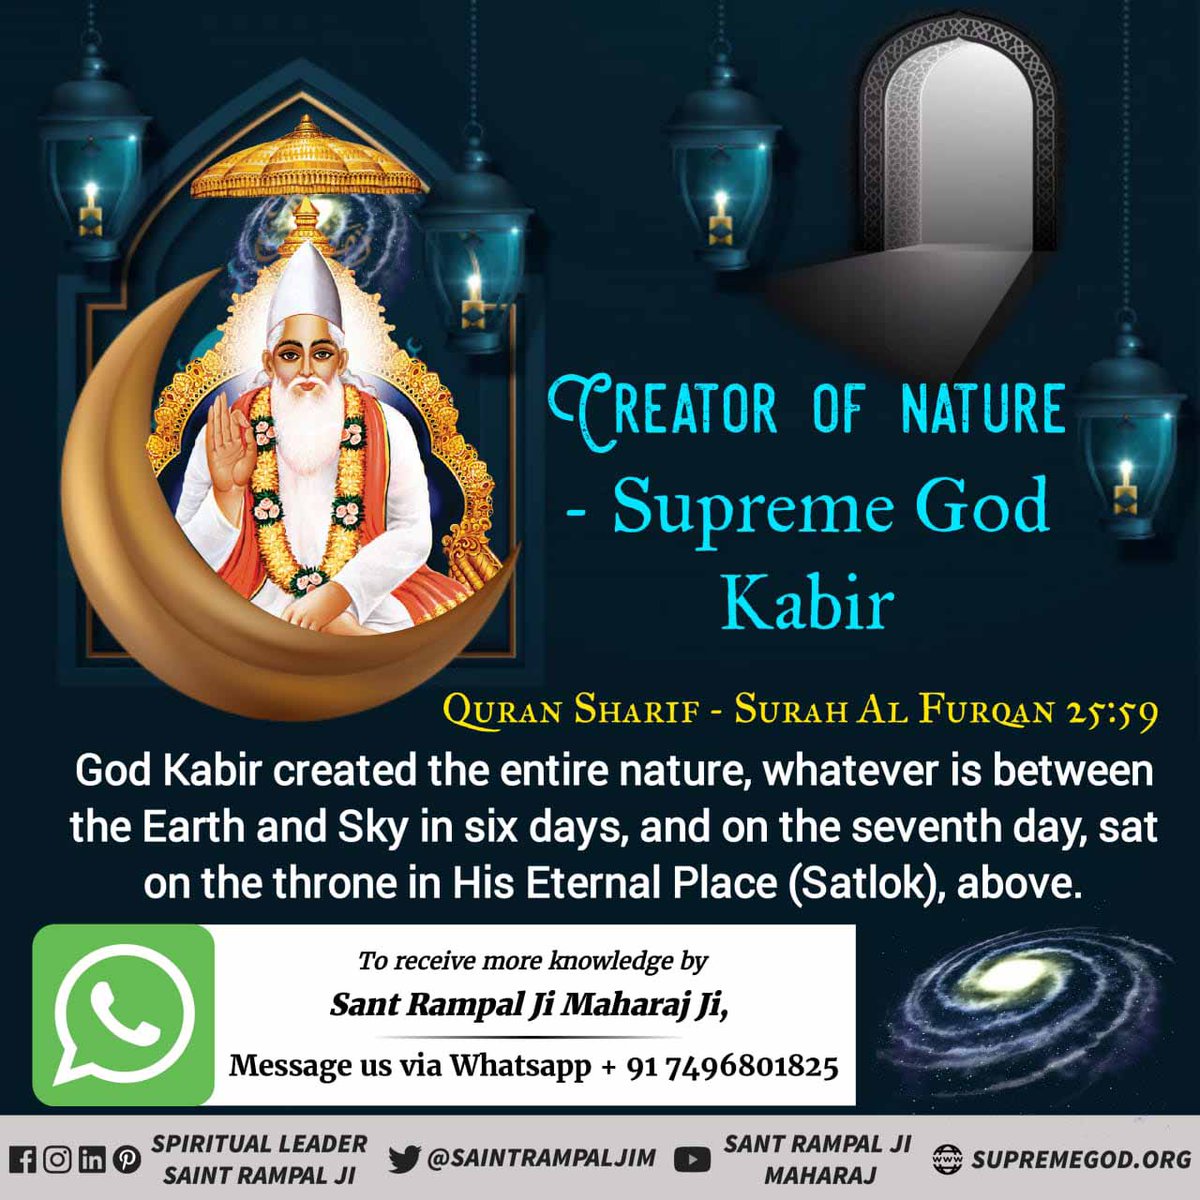 #GodMorningTuesday God Kabir created the entire nature, whatever is between the Earth and Sky in six days, and on the seventh day, sat on the throne in His Eternal Place (Satlok), above. #SaturdayMorning